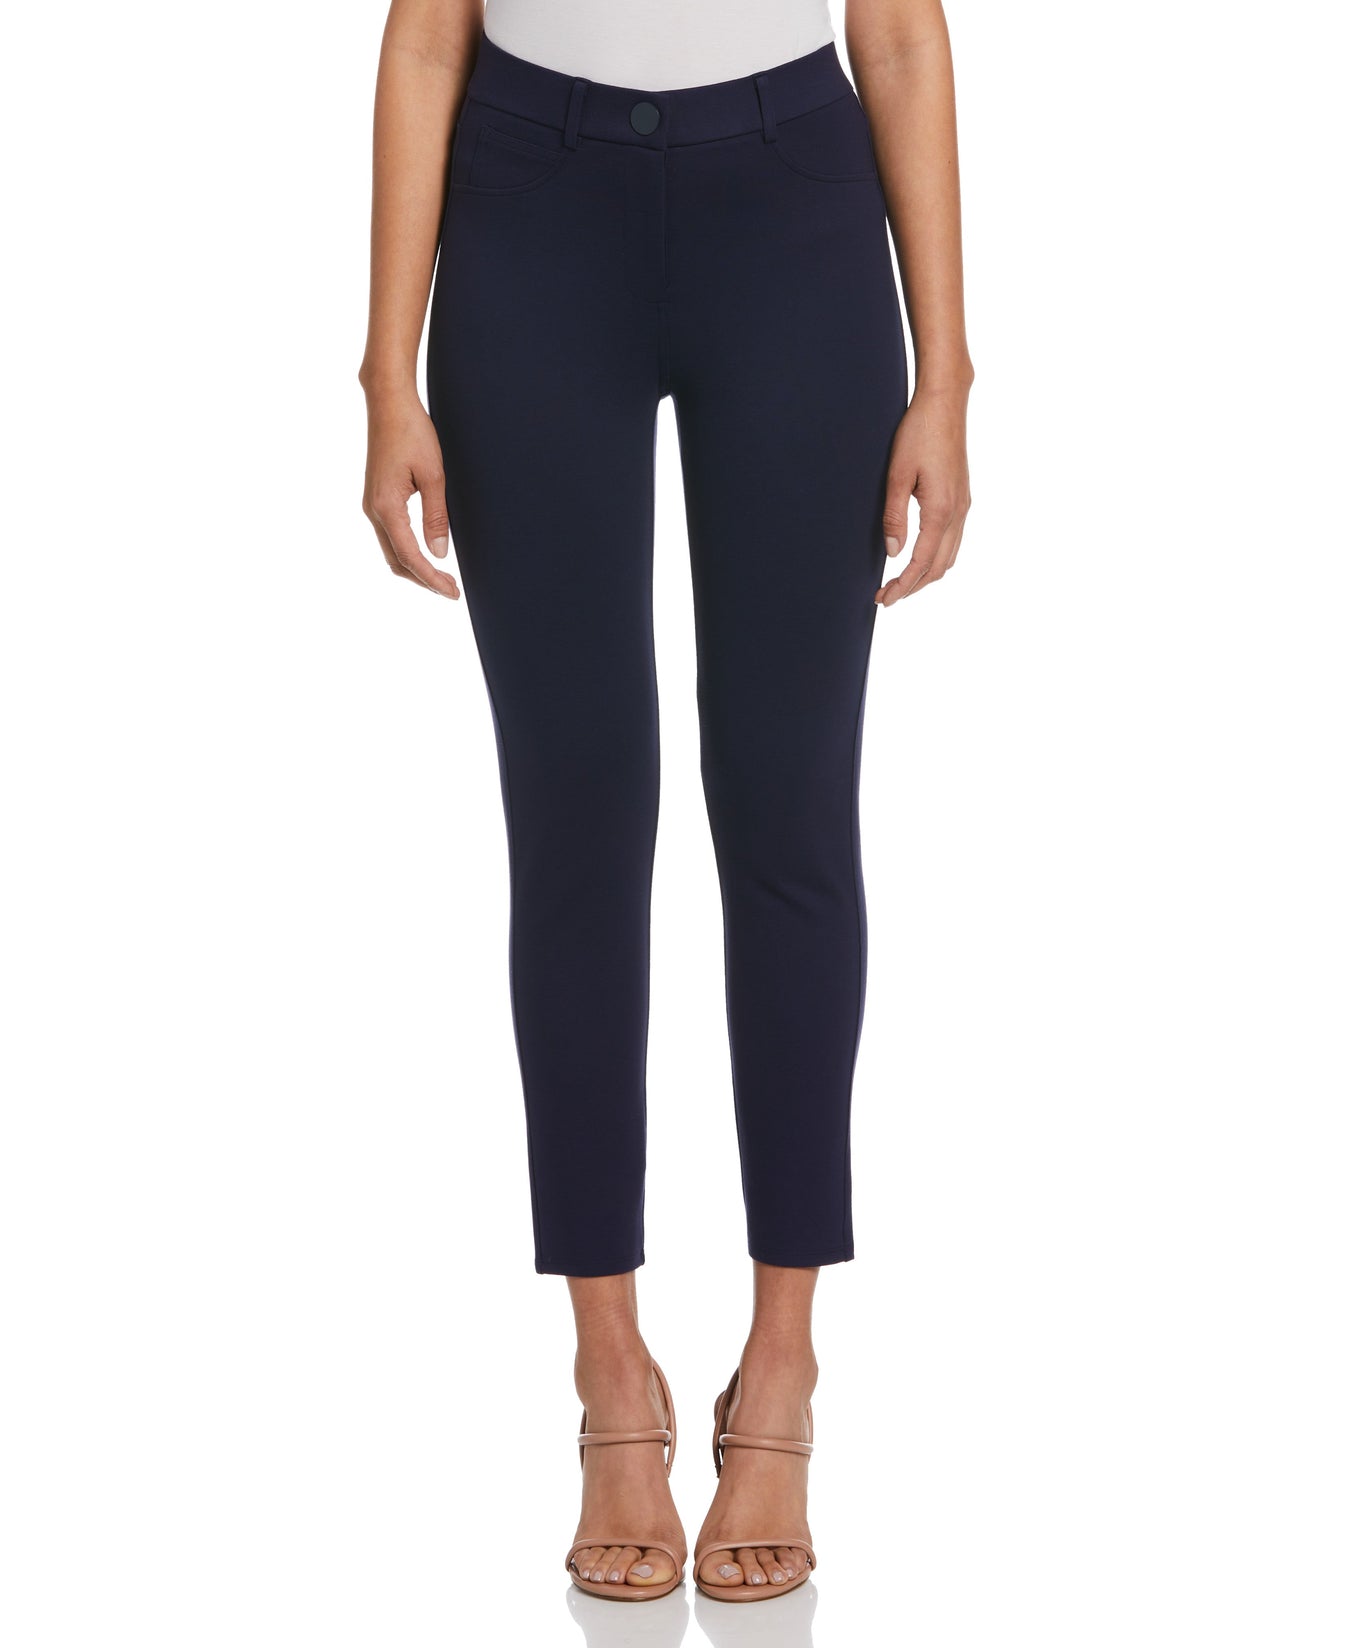 Buy Solid Skinny Fit Ponte Pants with Zipper Pockets